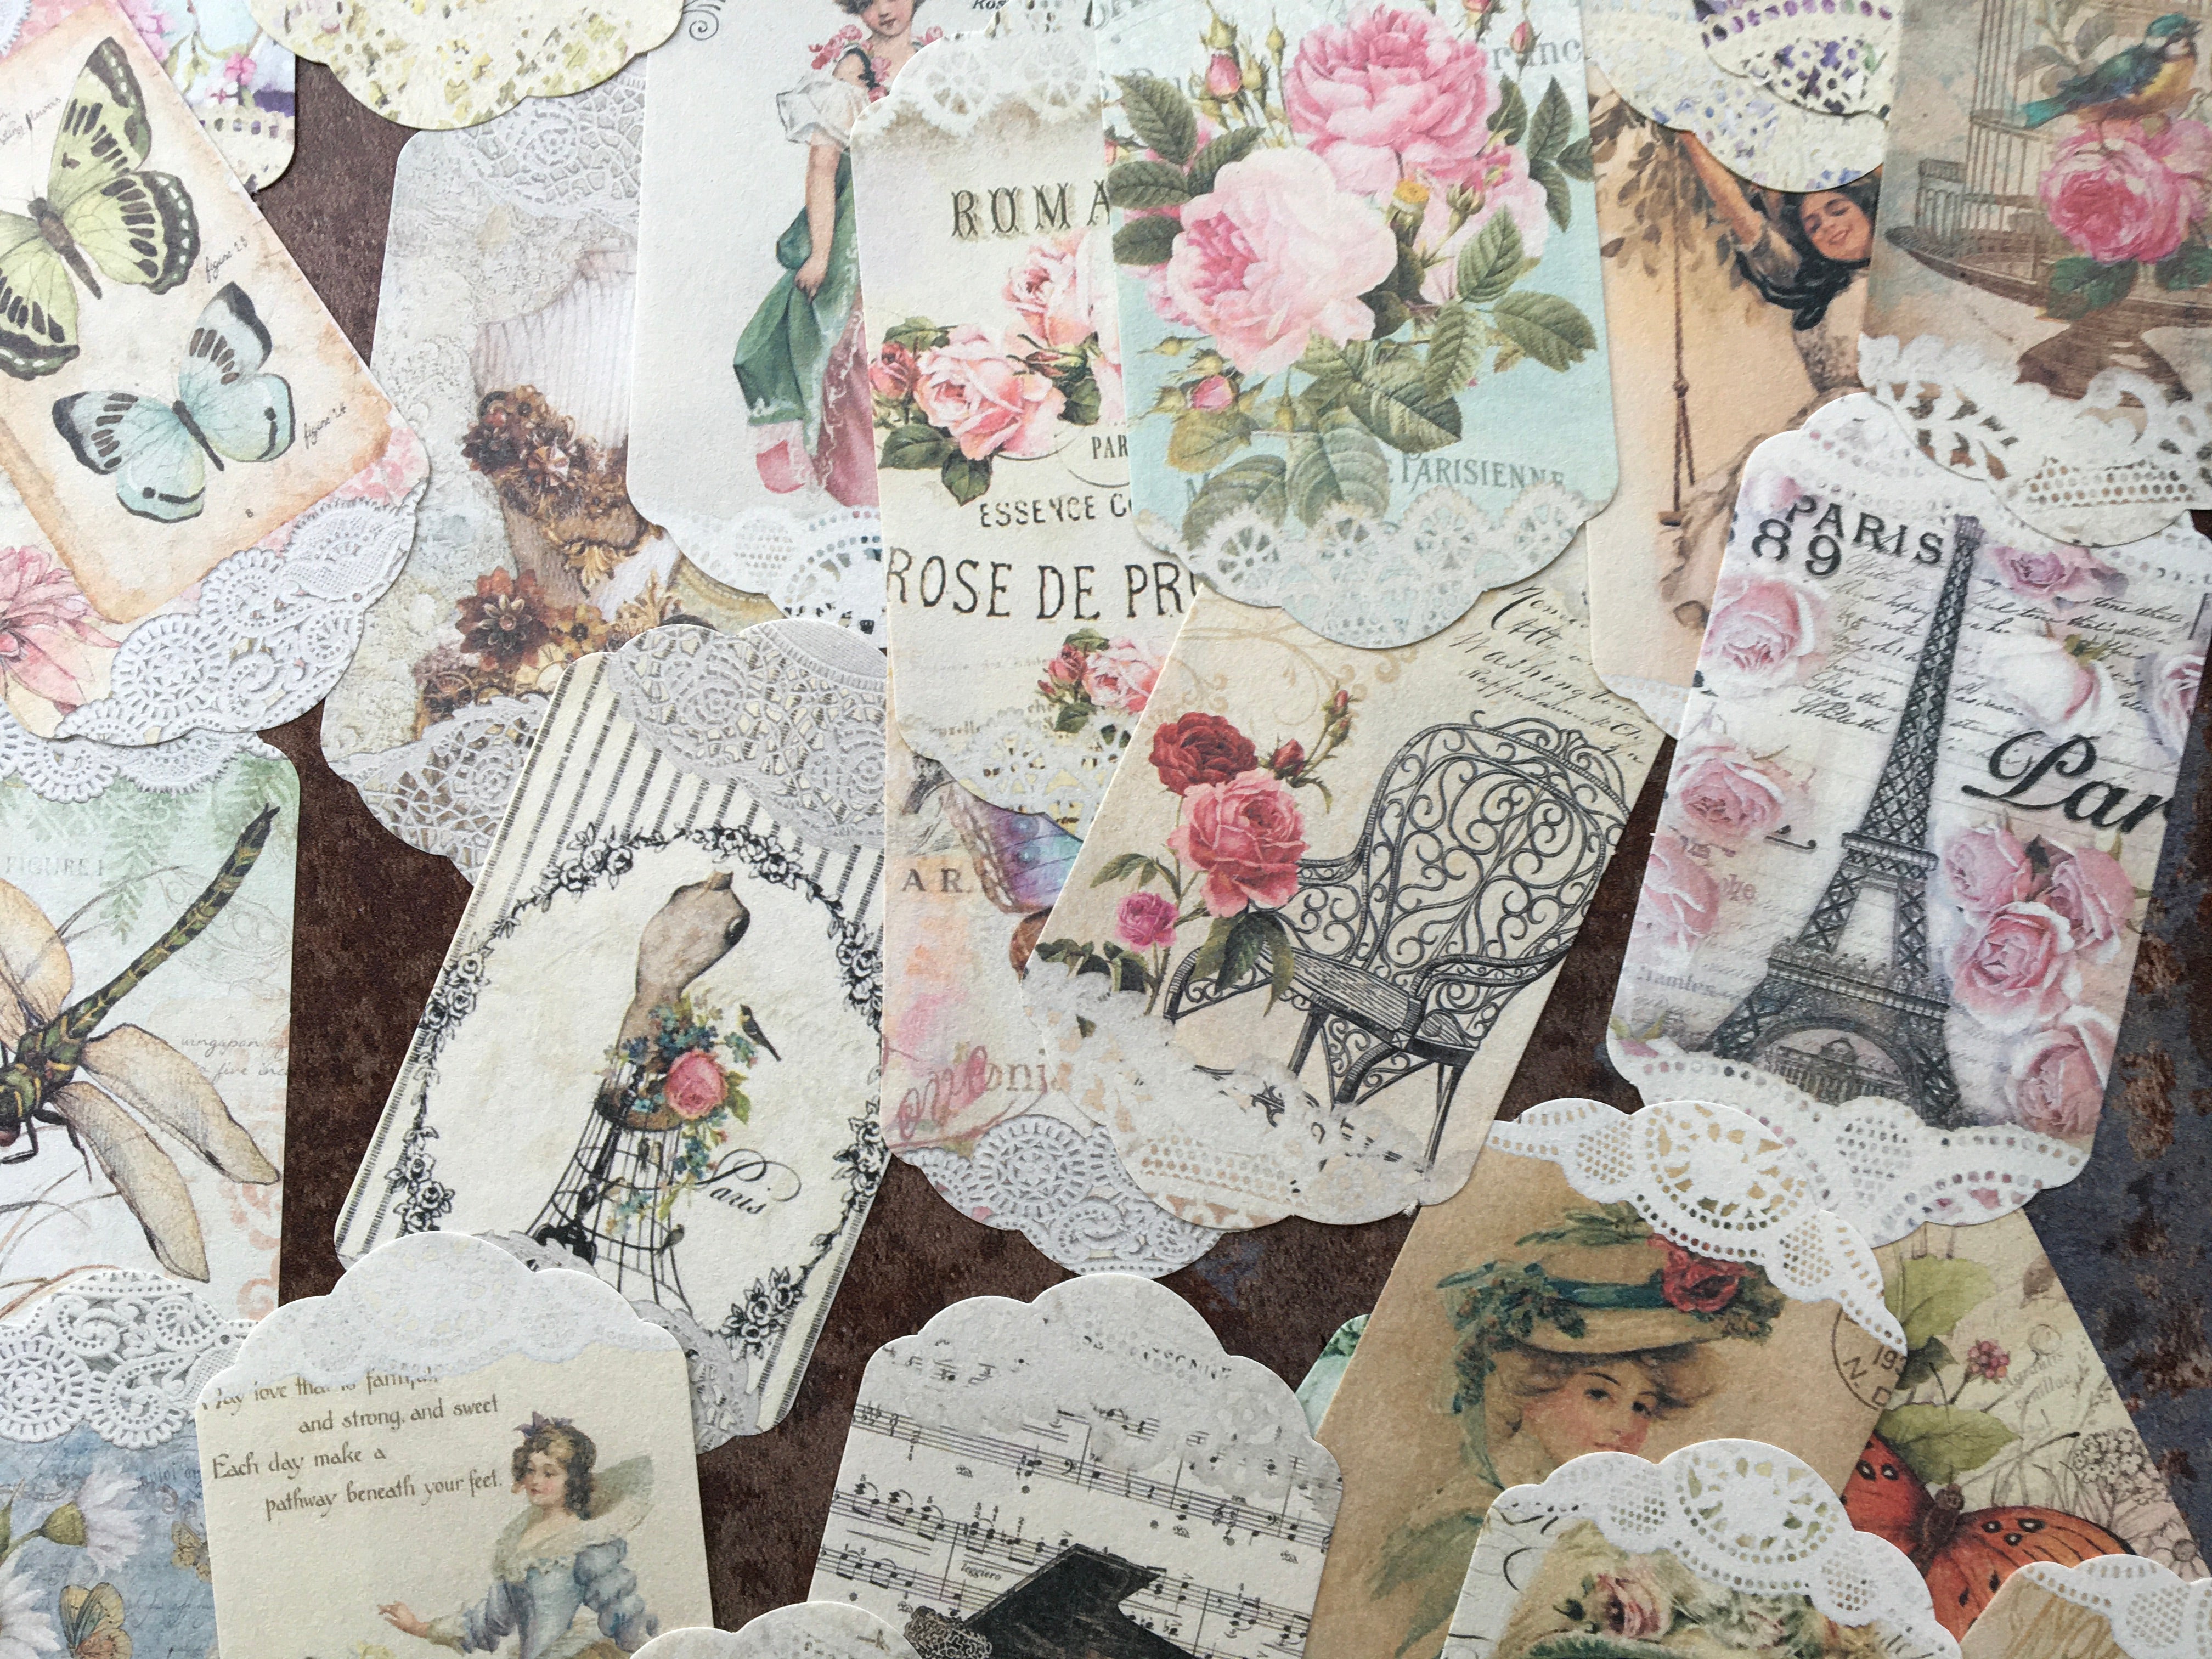 Needlework Vintage Ephemera, Beautiful Images And Photos For Scrapbooking  Or Cut And Collage